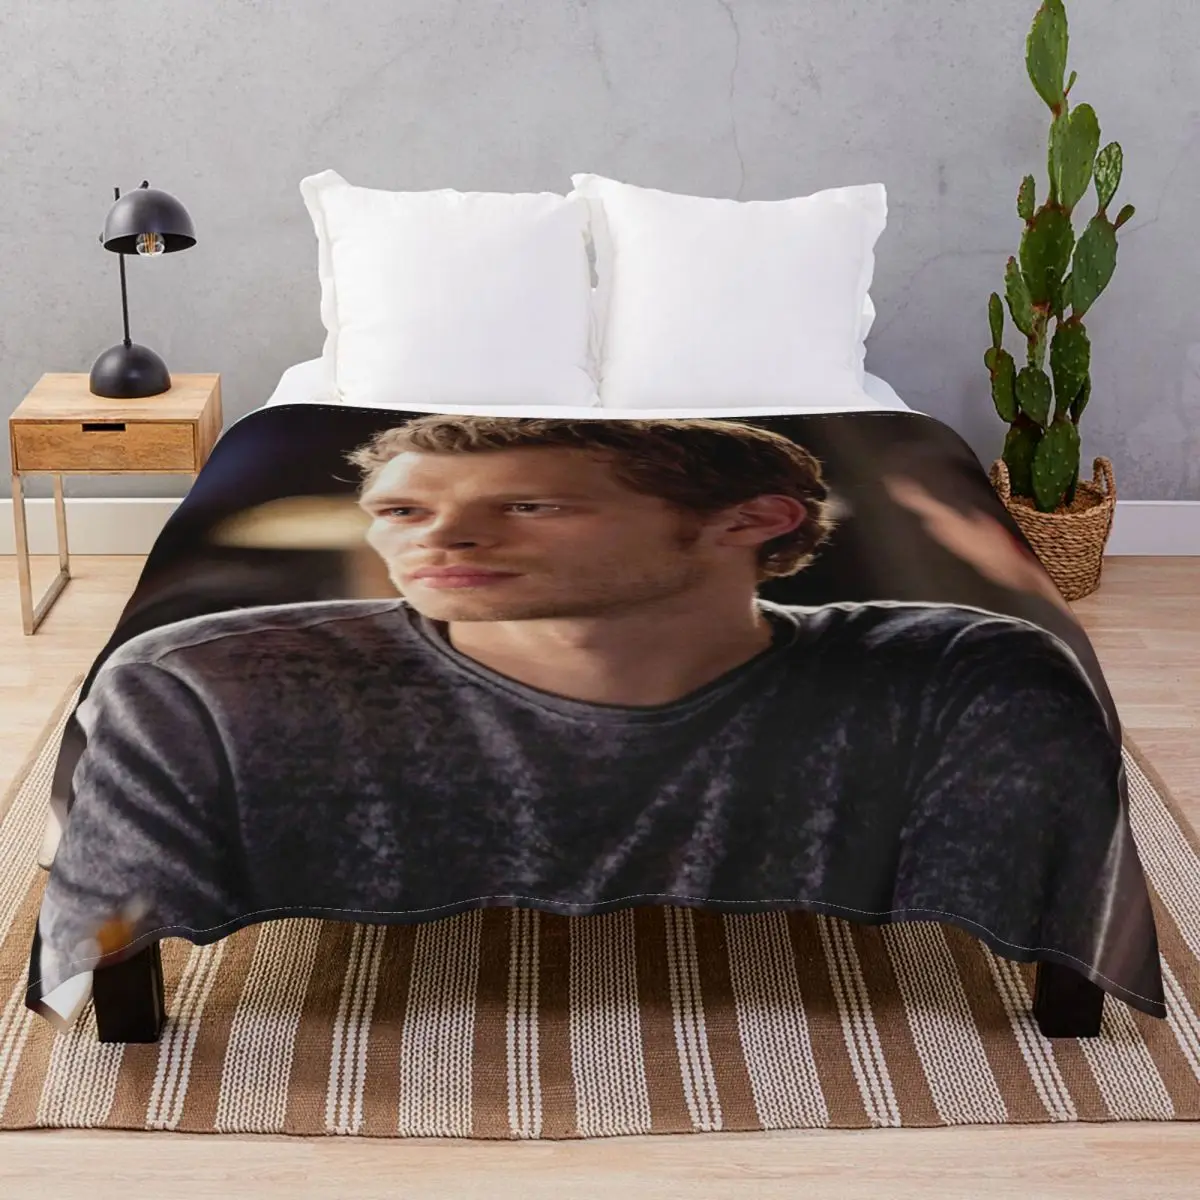 Klaus Mikaelson Blankets Coral Fleece All Season Lightweight Thin Throw Blanket for Bed Home Couch Camp Office